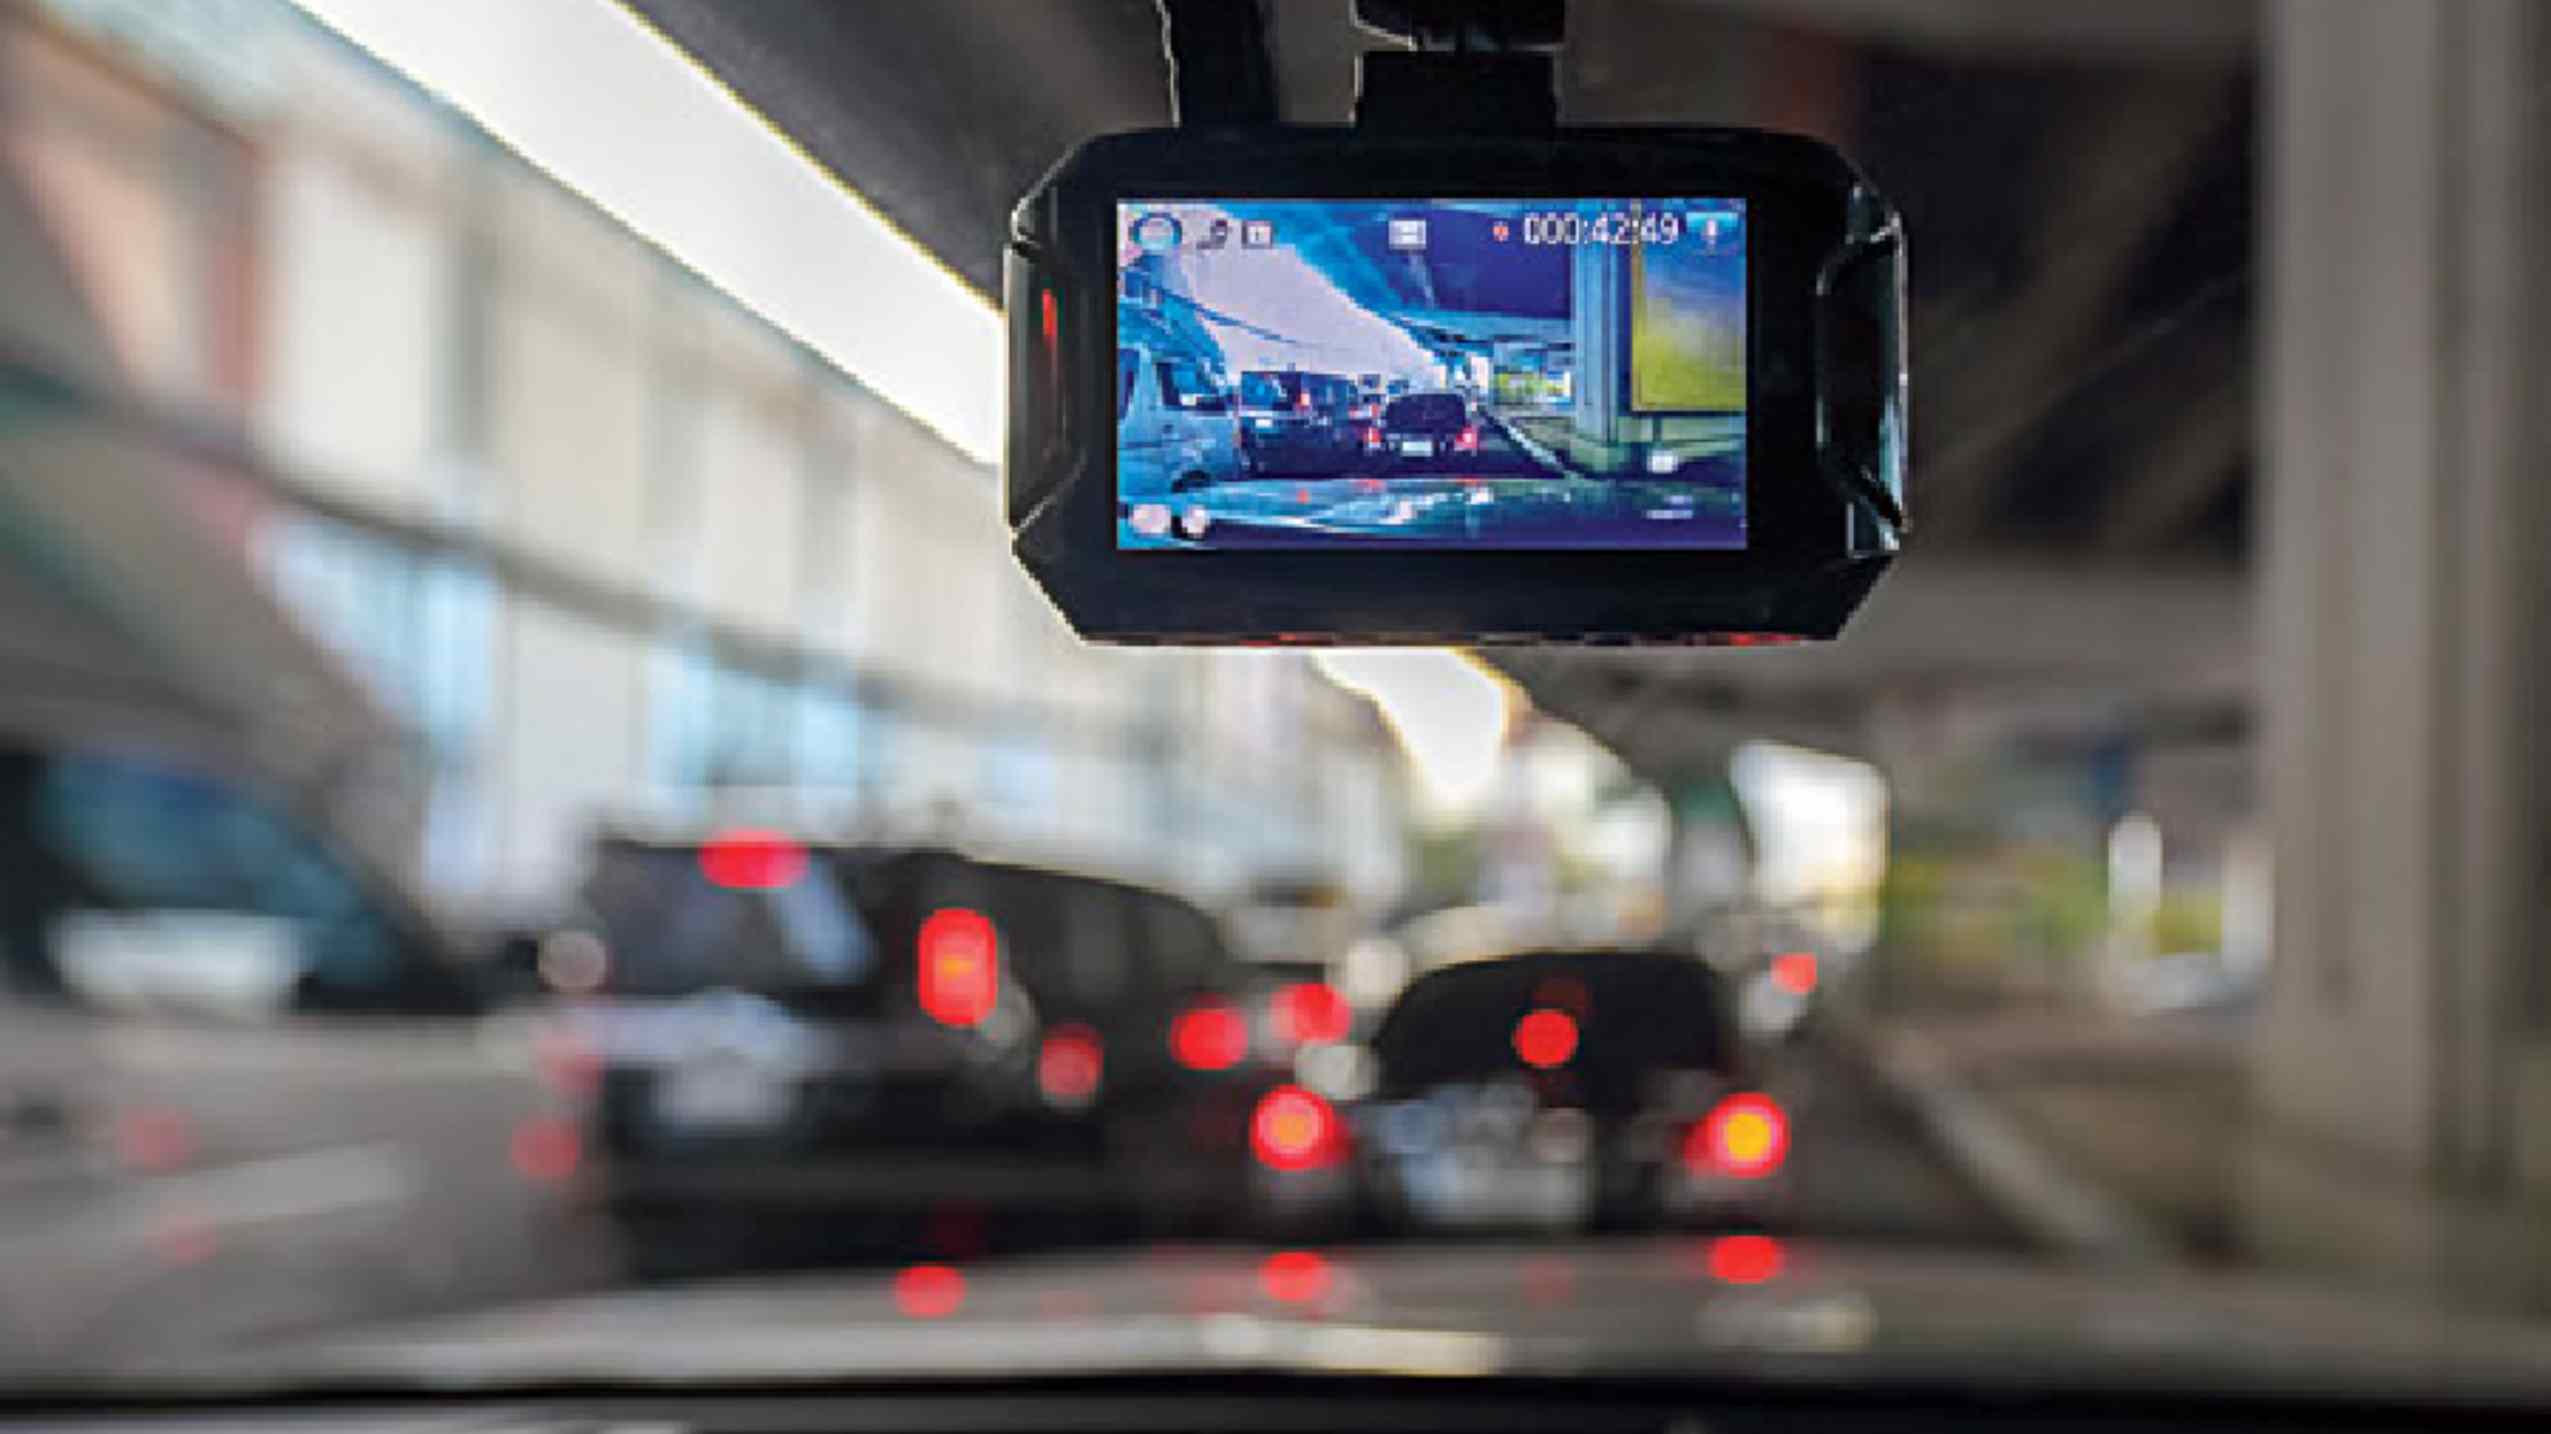 A dashcam comes handy especially in cases of road accidents